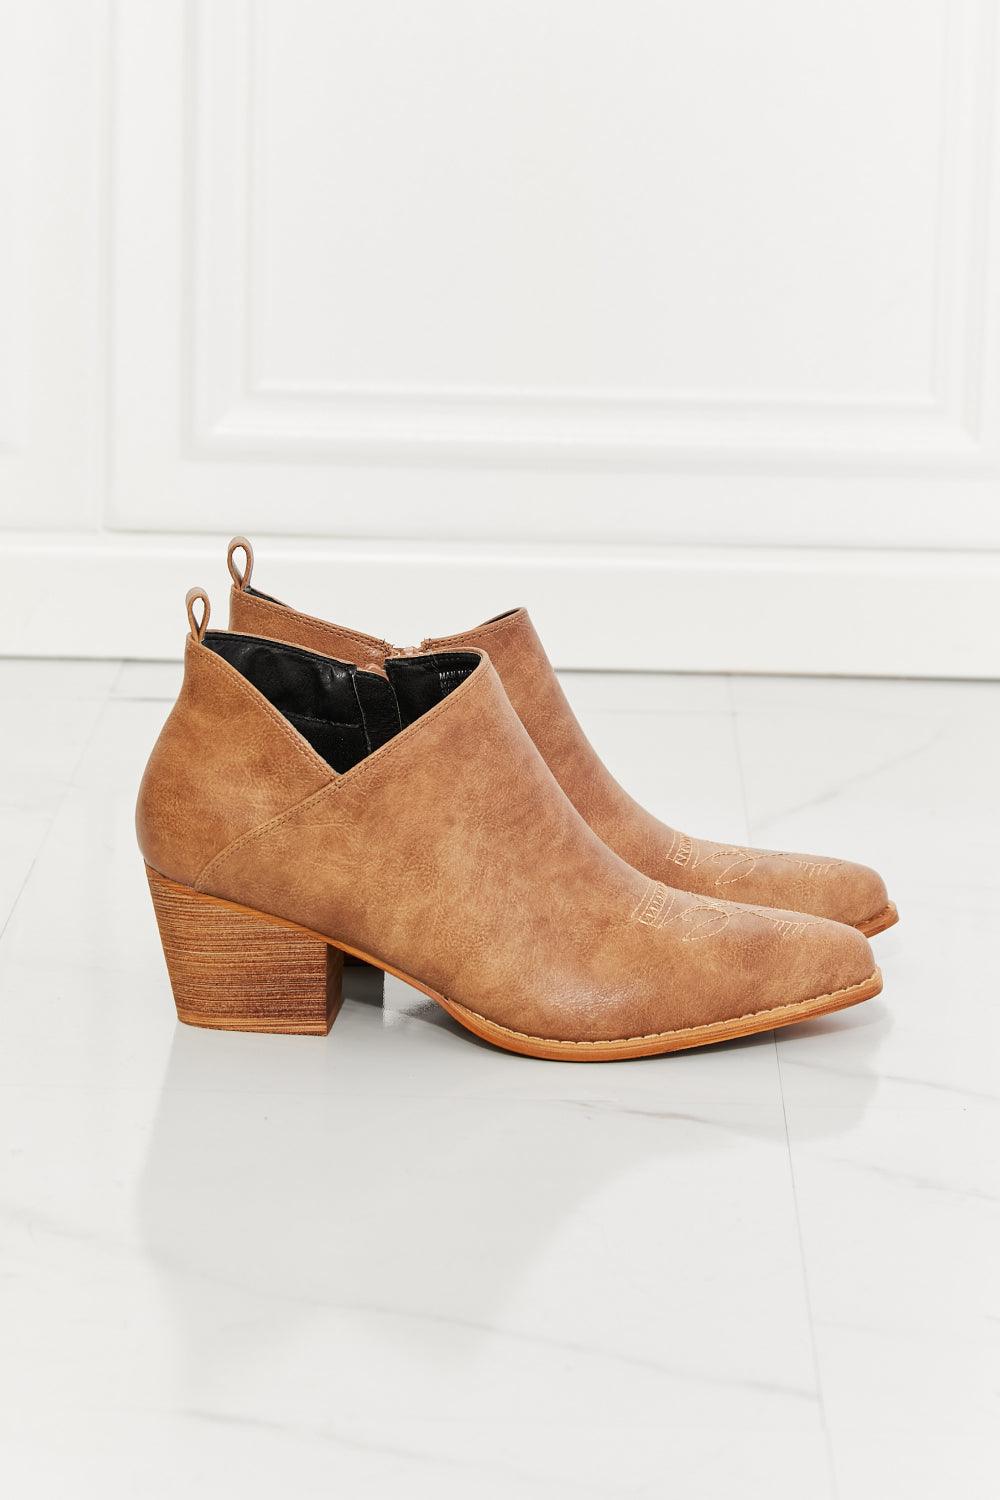 MMShoes Trust Yourself Embroidered Crossover Cowboy Bootie in Caramel - Trendha